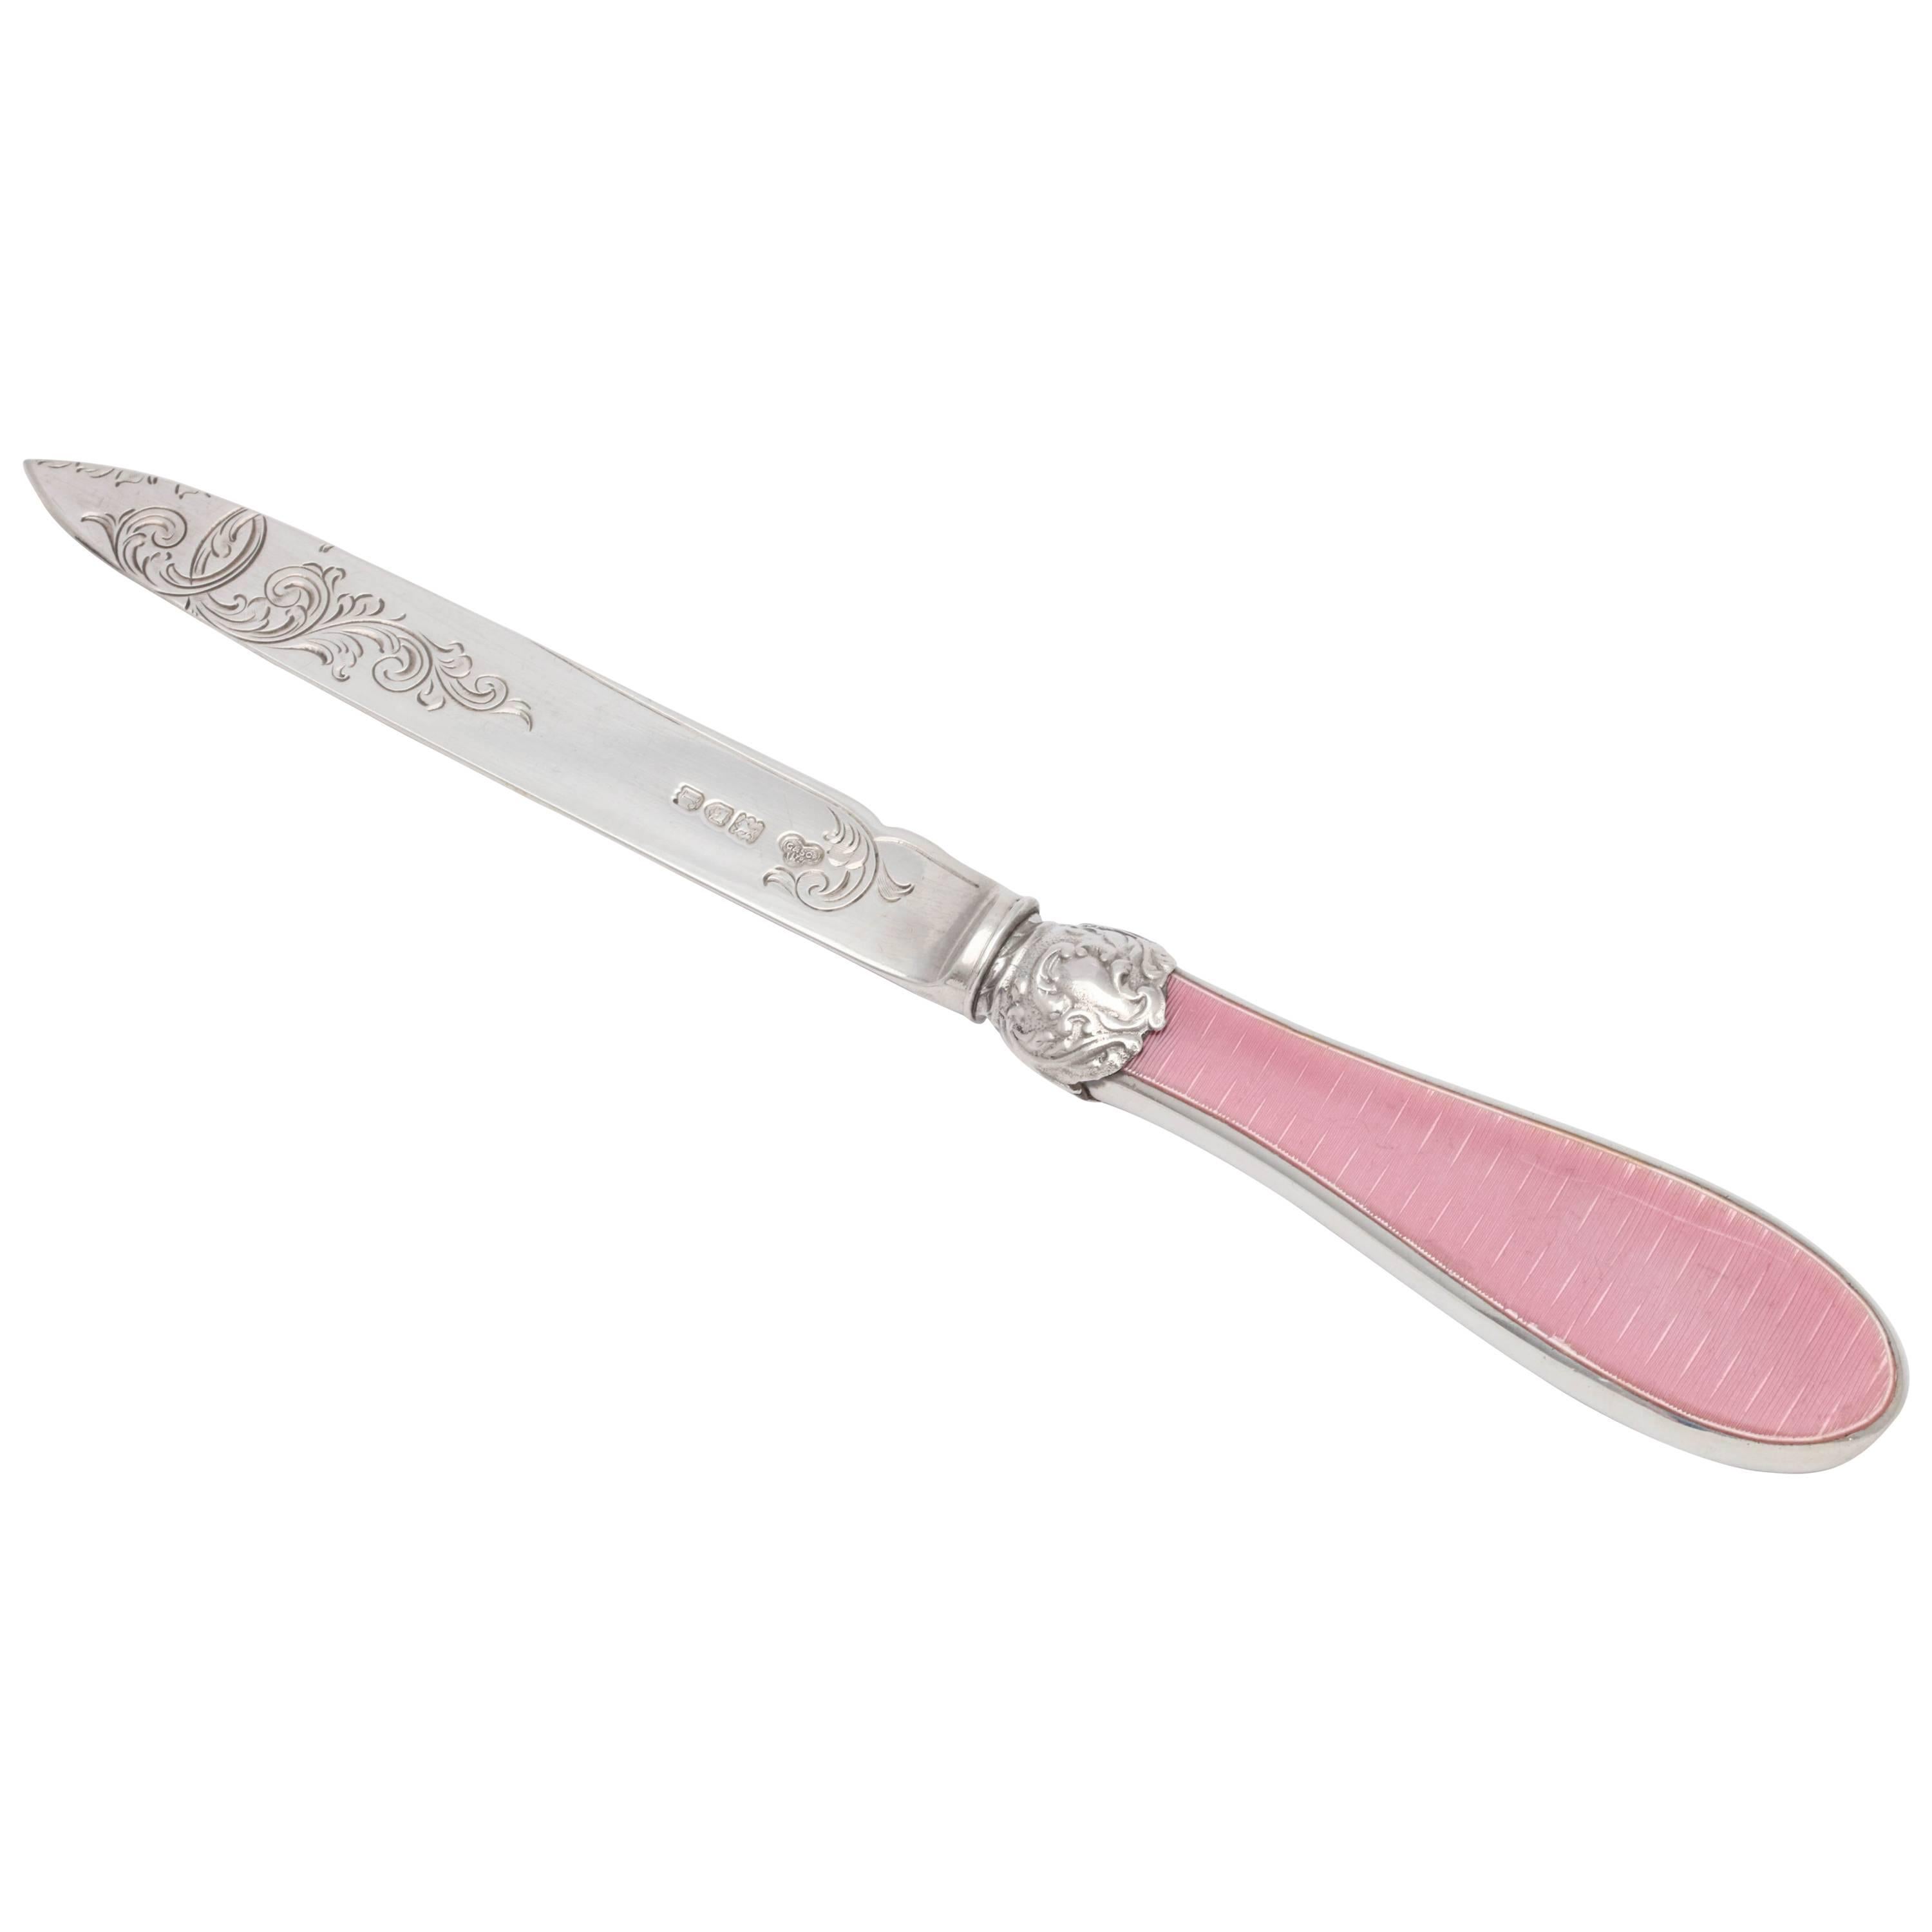 Edwardian Style Sterling Silver and Pink Guilloche Enamel-Mounted Letter Opener